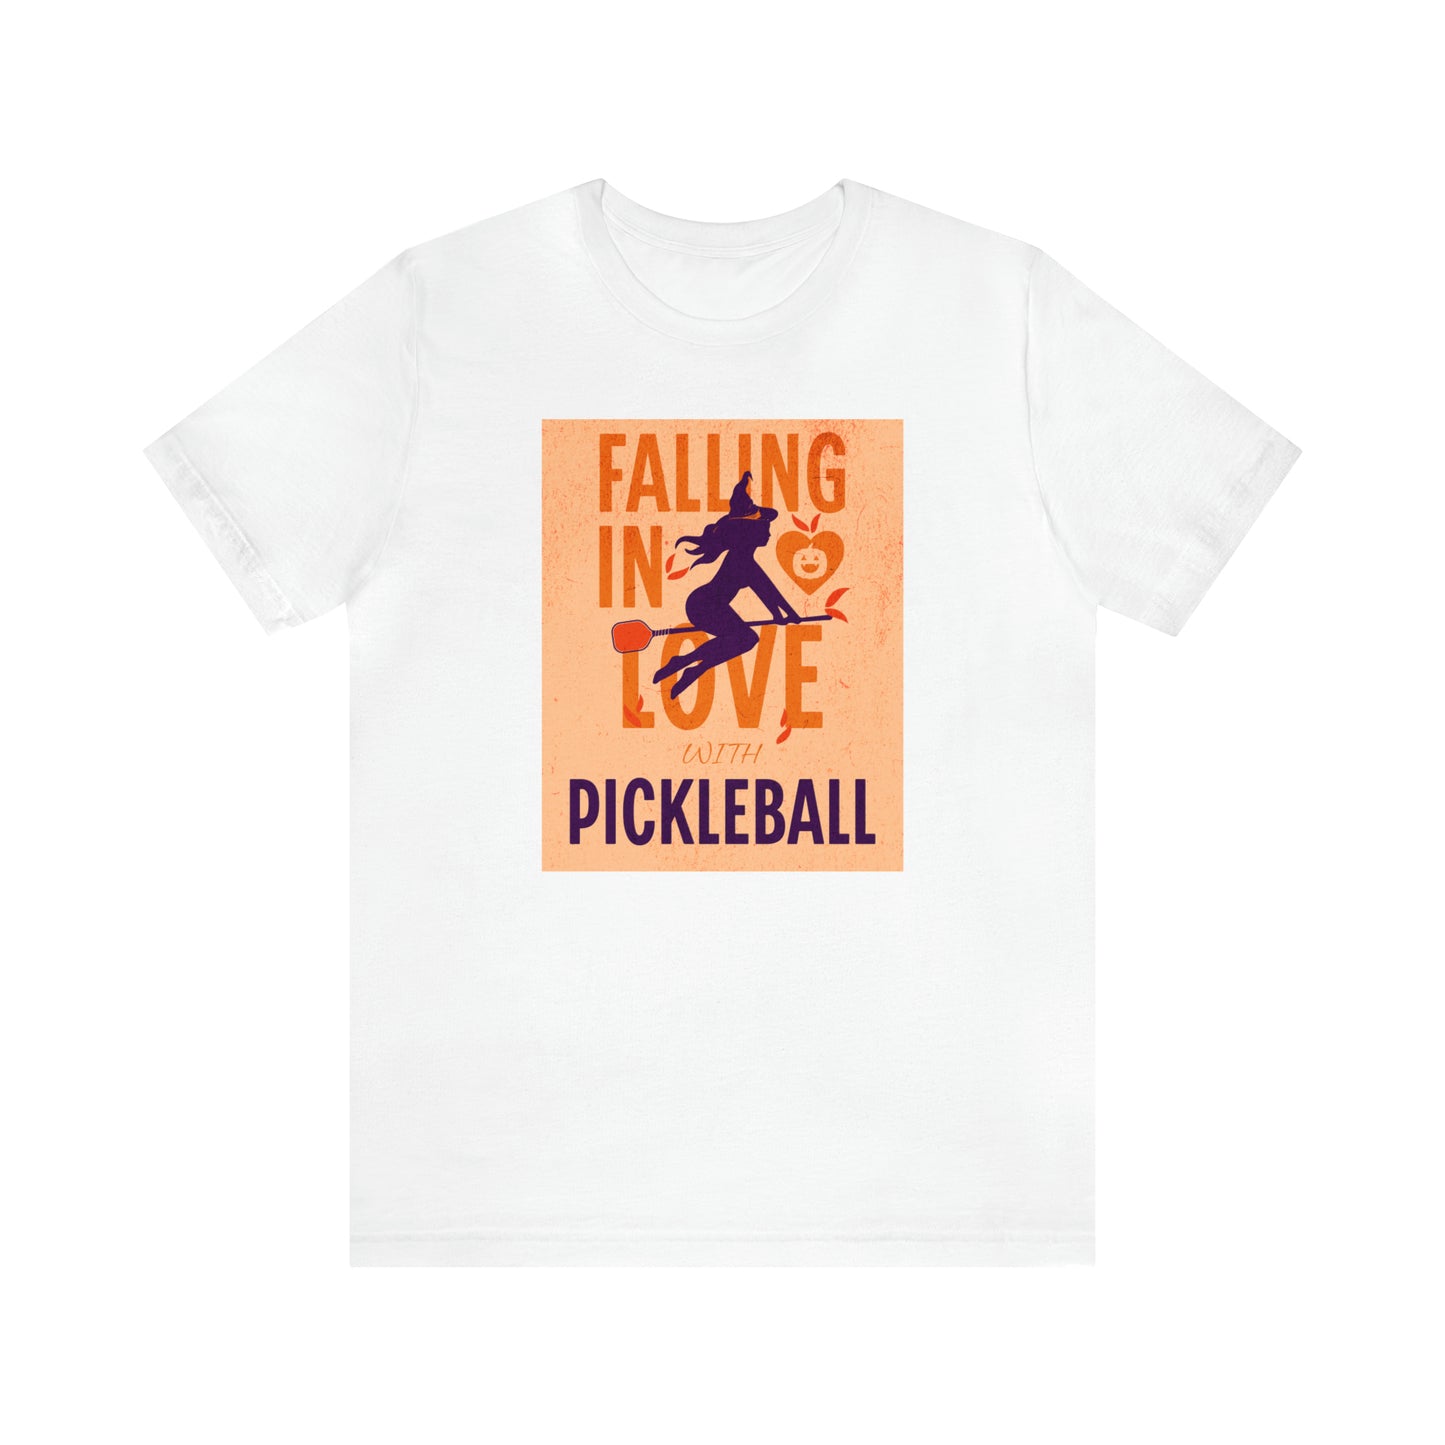 FALLing in Love with Pickleball - Halloween T-Shirt